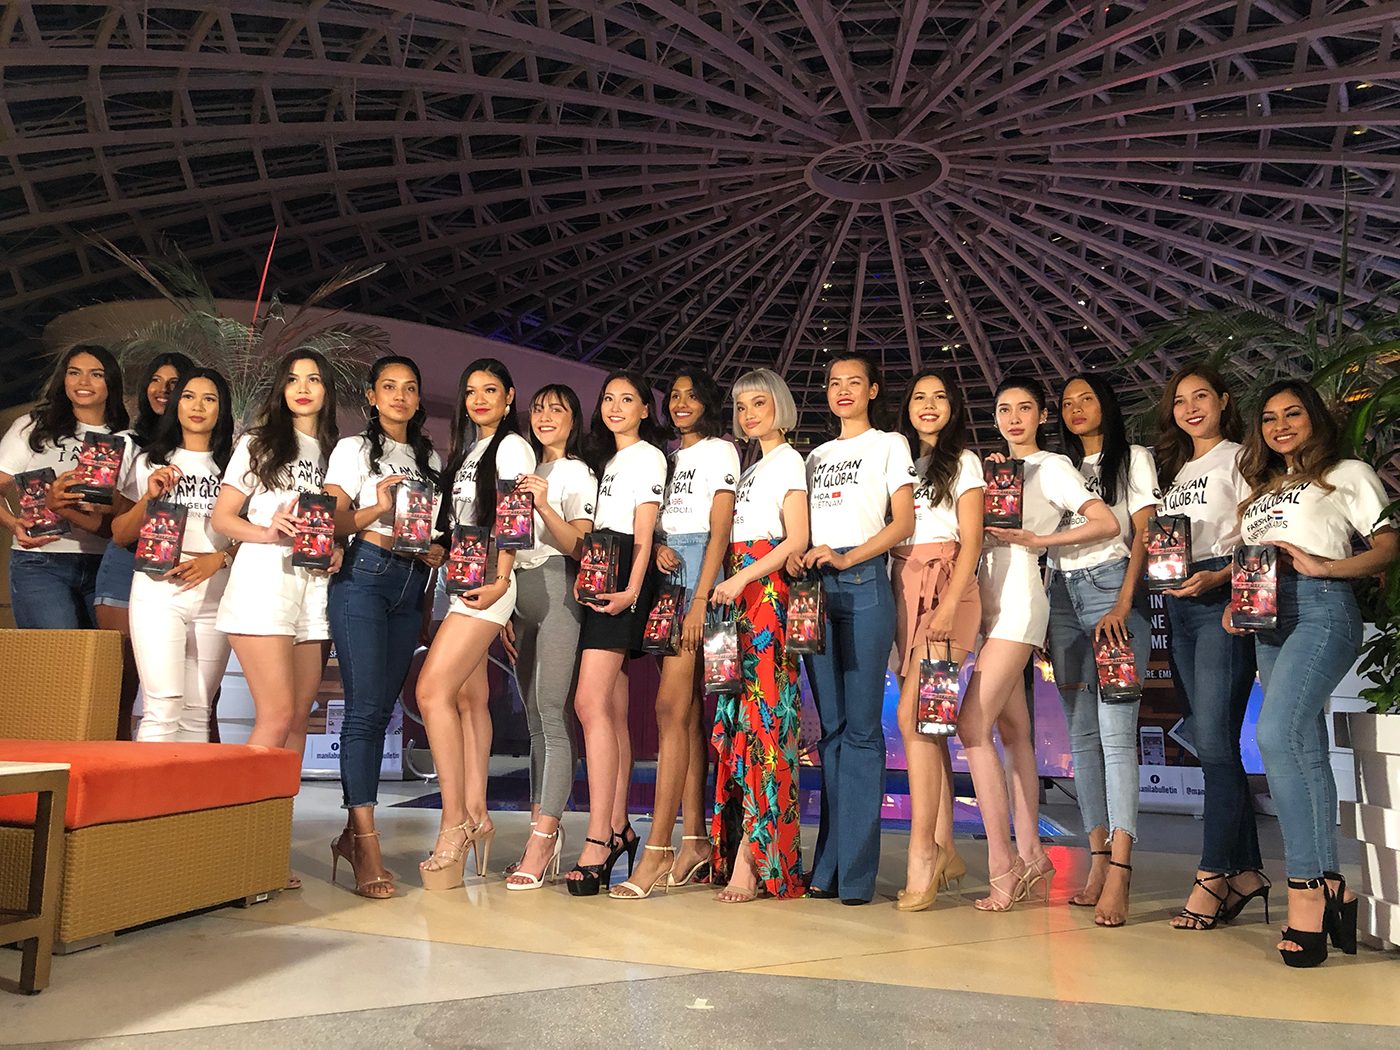 38 candidates vie for Global Asian Model 2019 win